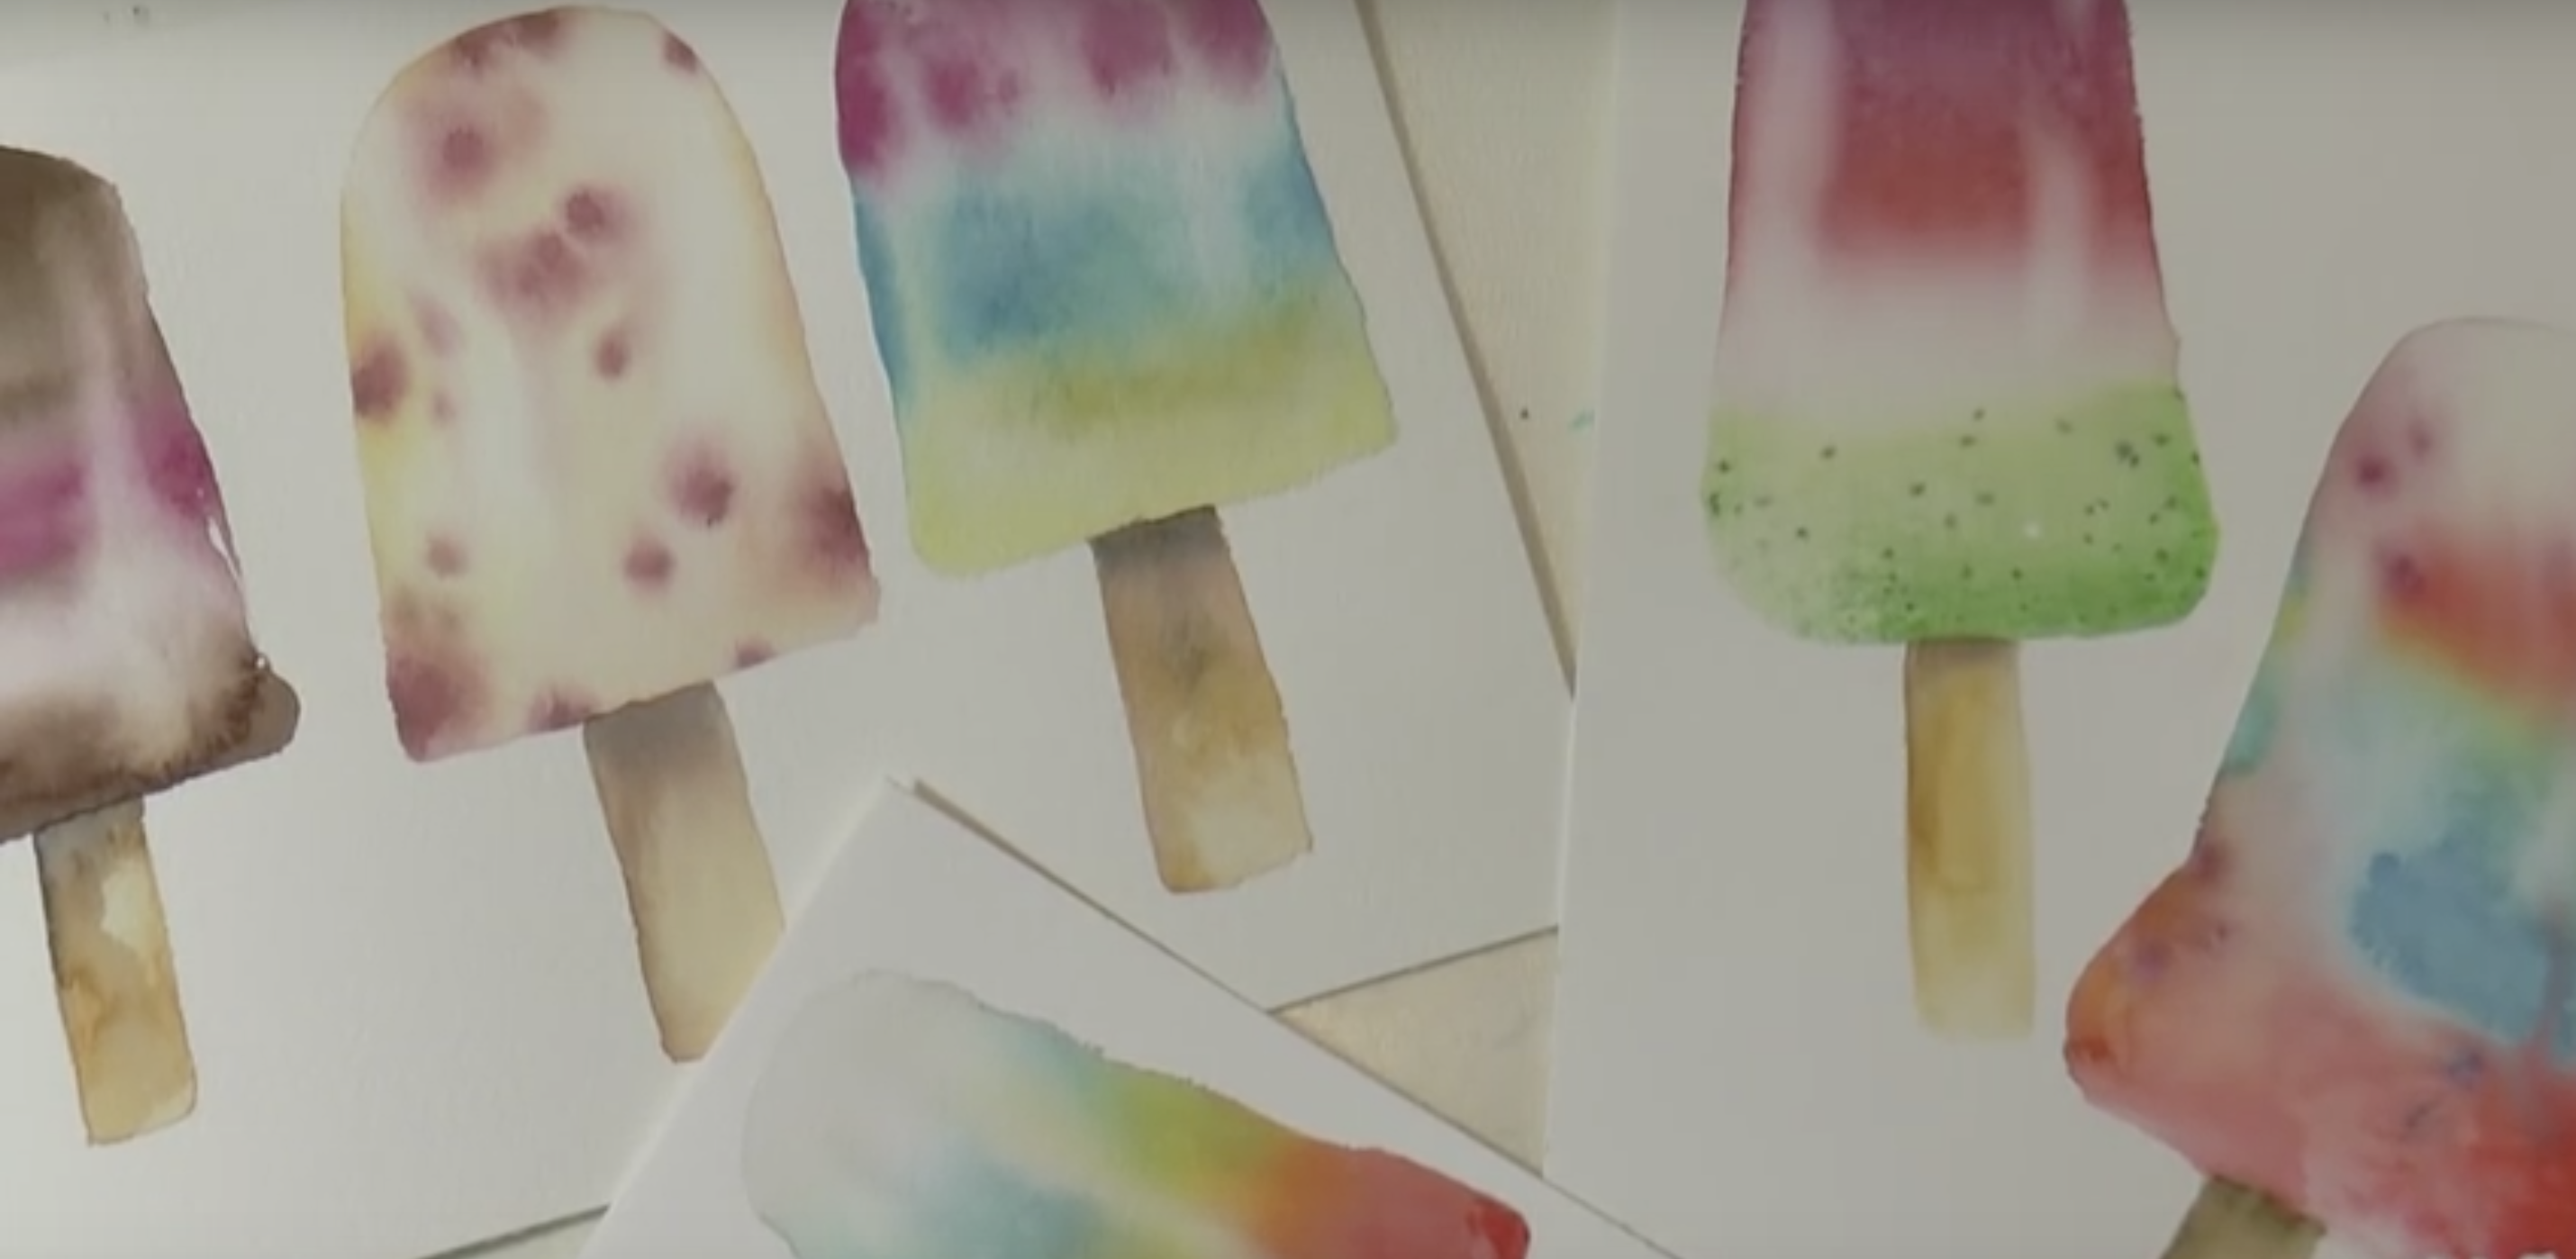 easy-watercolor-ideas-techniques-how-to-paint-a-watercolor-popsicle - Step 9